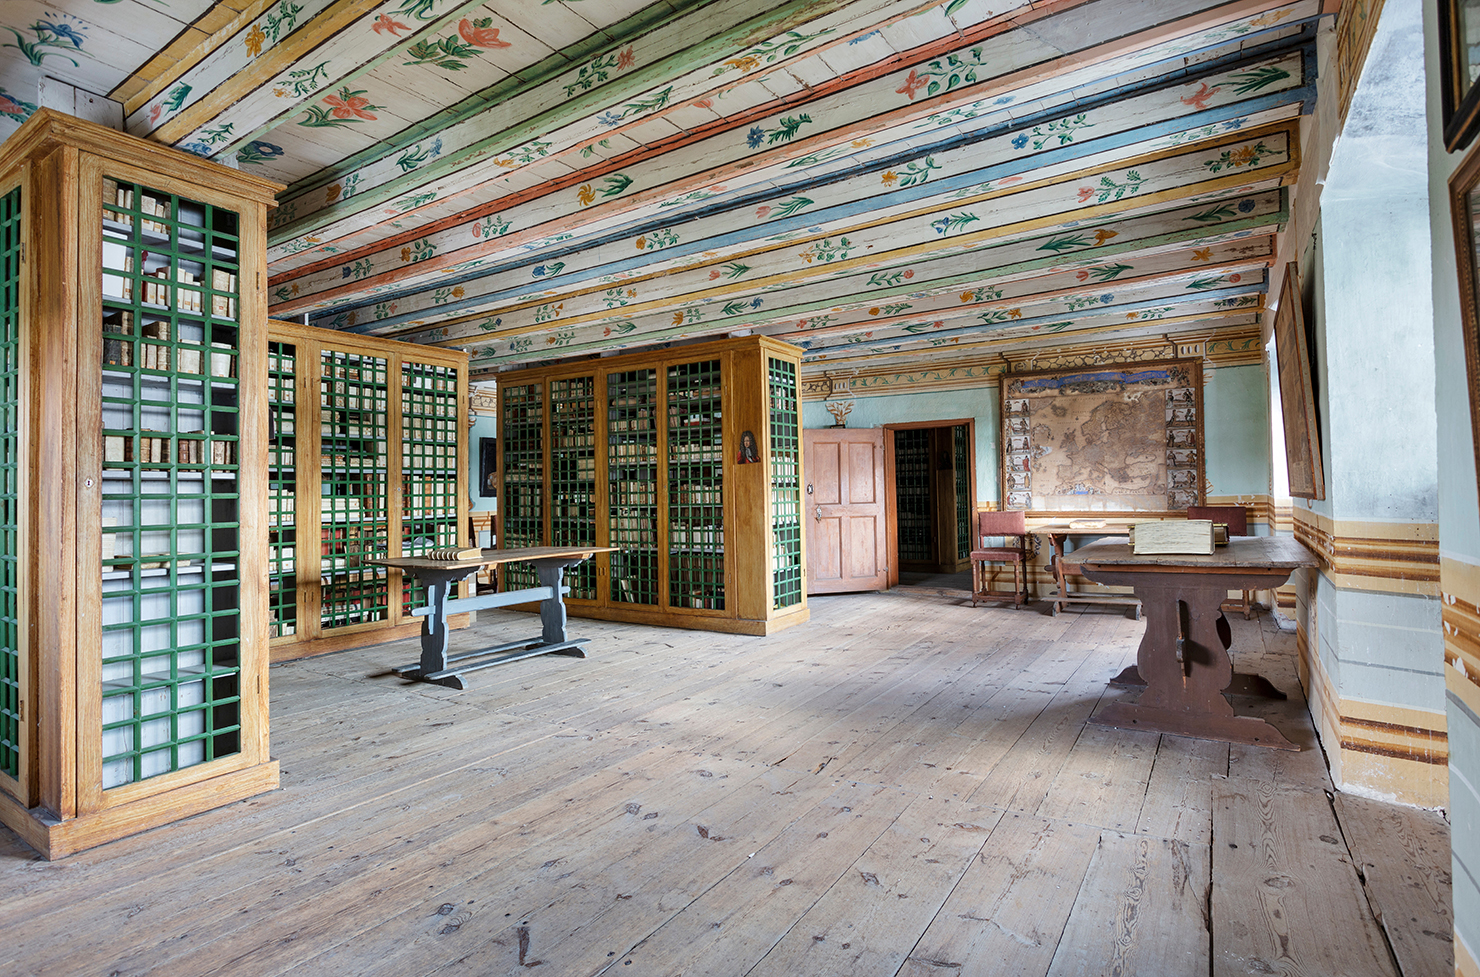 A room with bookshelves. The bookshelves have green grill doors. The ceiling is painted with flowers.